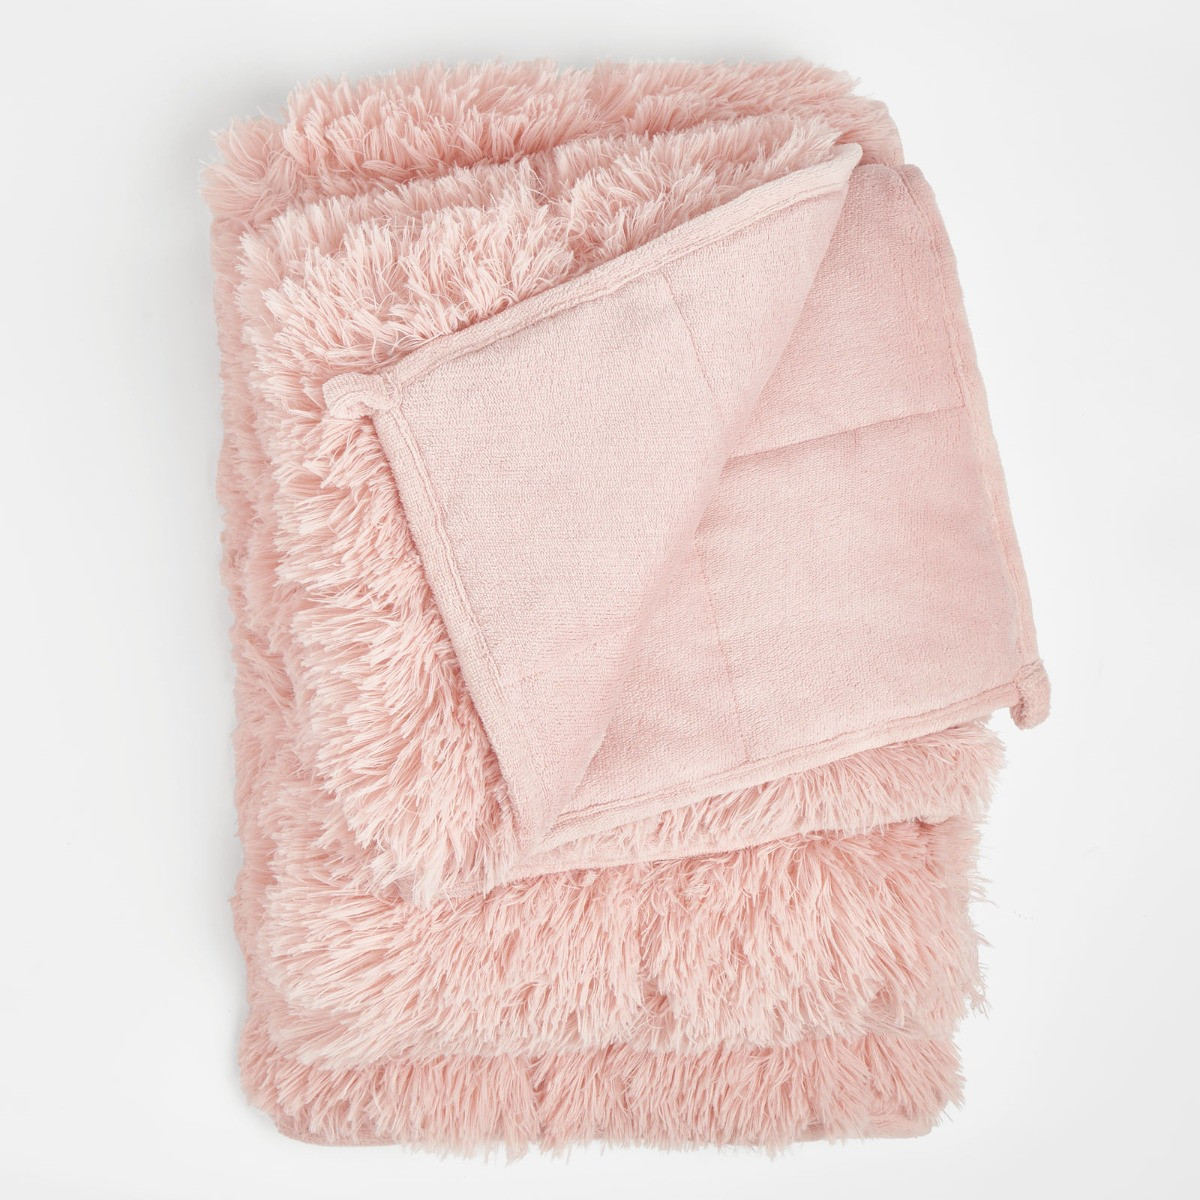 Sienna by OHS Fluffy Weighted Blanket, Blush - 50 x 70 inches - 13.2lb>